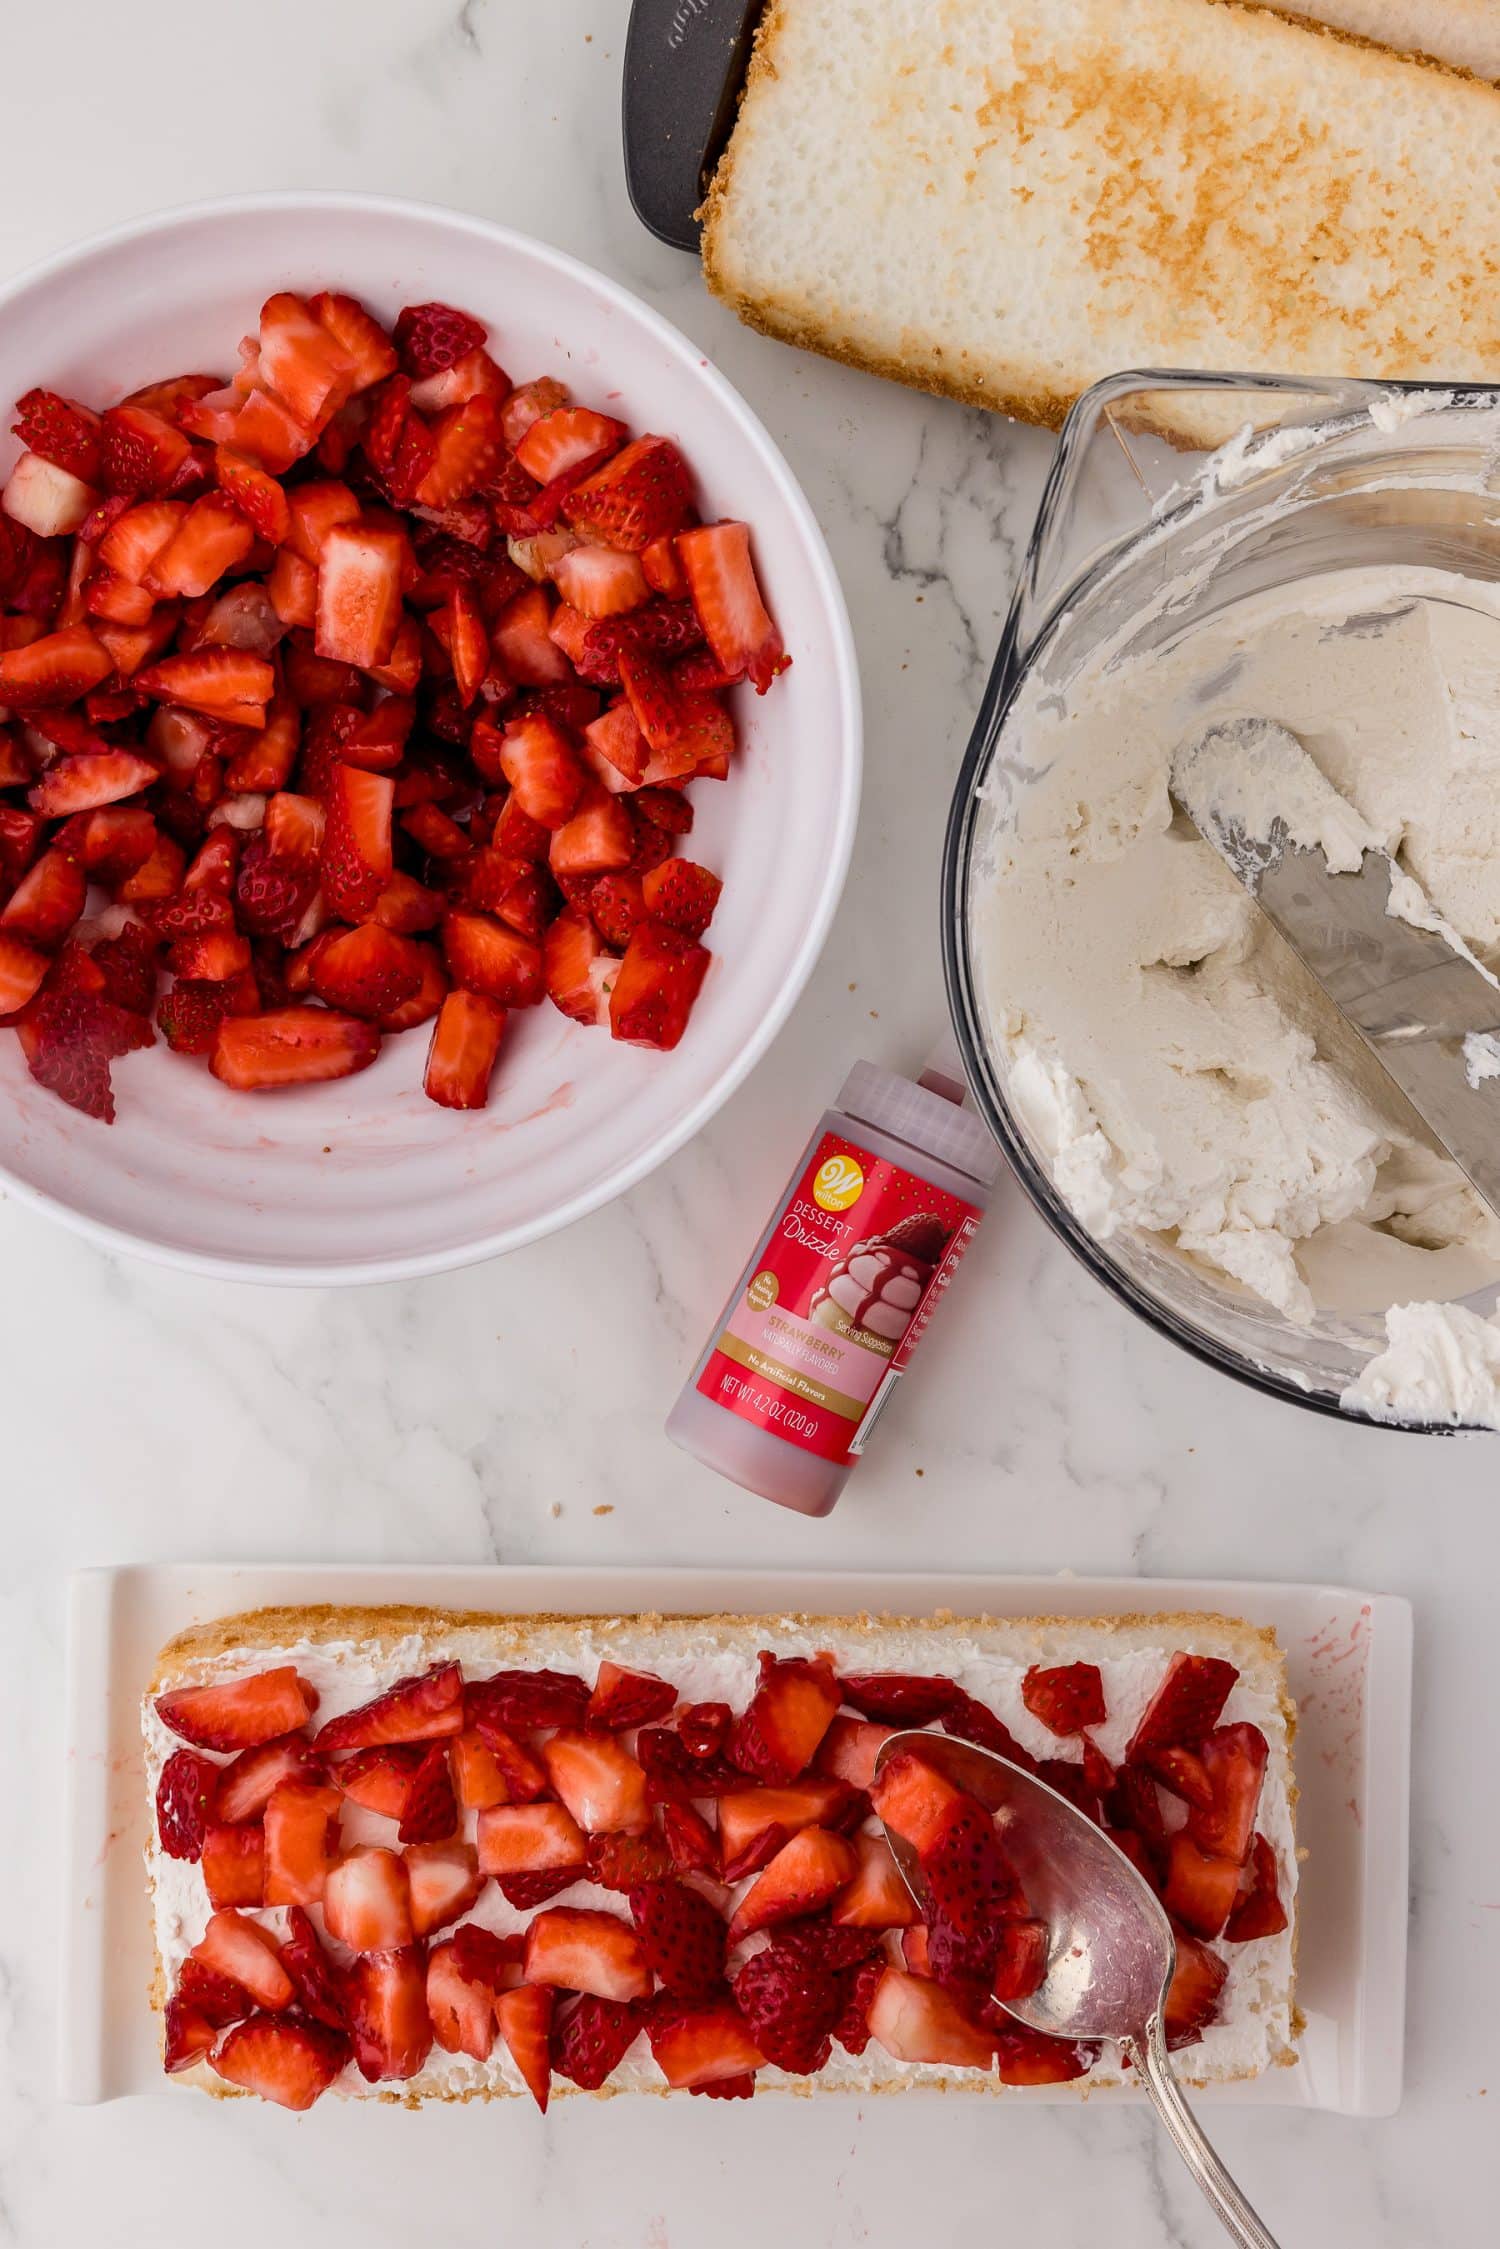 placing diced strawberries on top of a layer of angel food cake, a bowl of strawberries, whipped cream, and Wilton Dessert Drizzle on a white marble countertop.